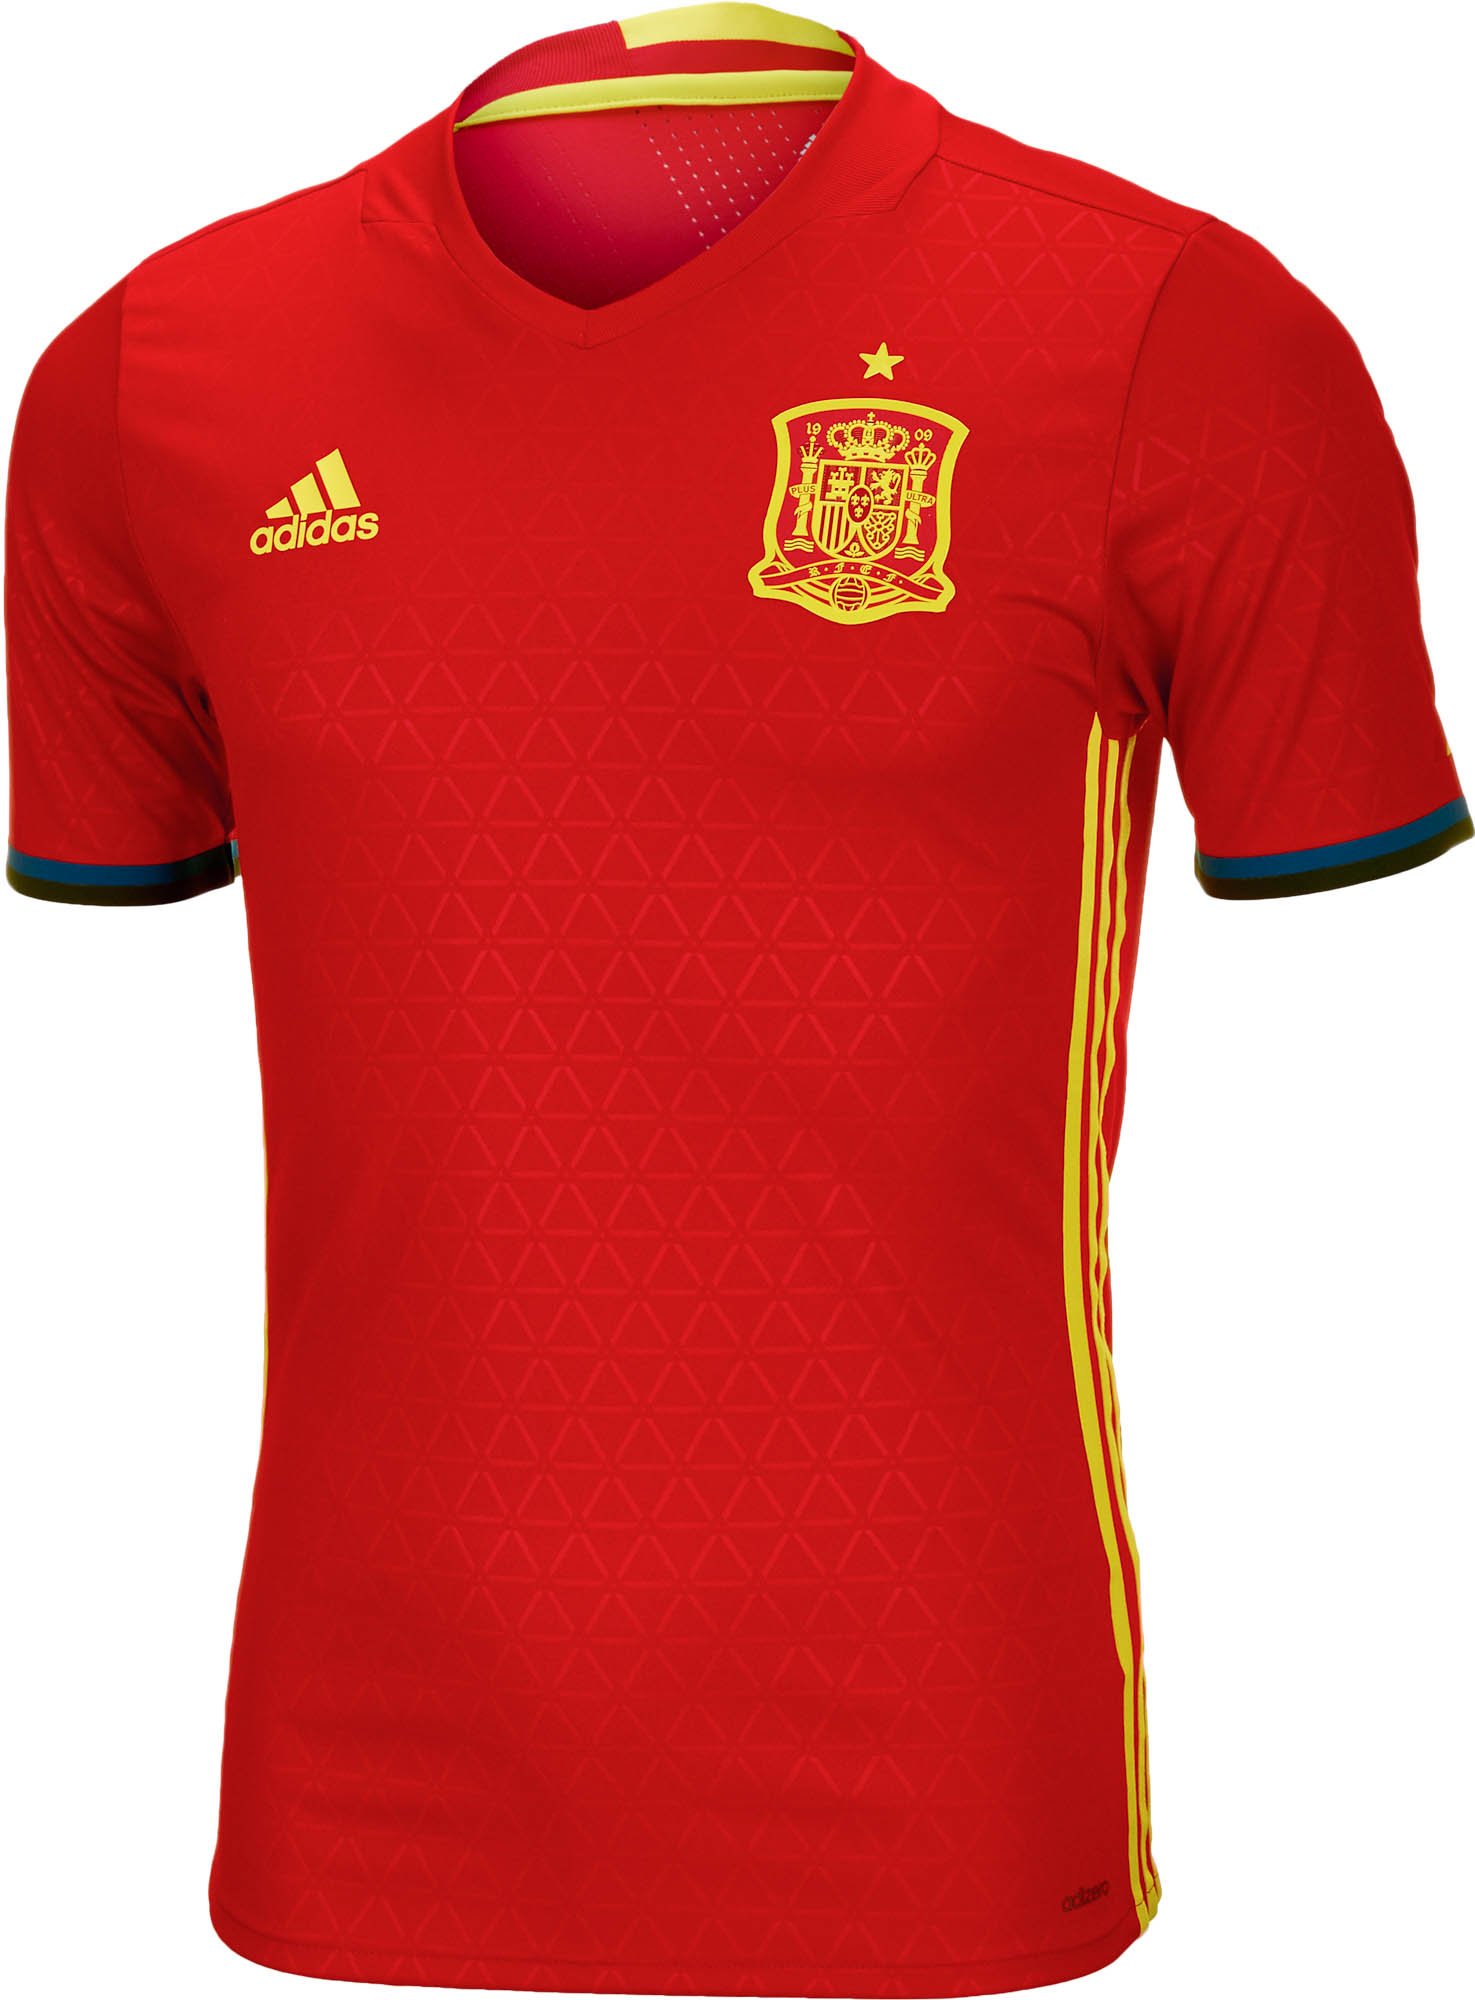 adidas authentic soccer jersey